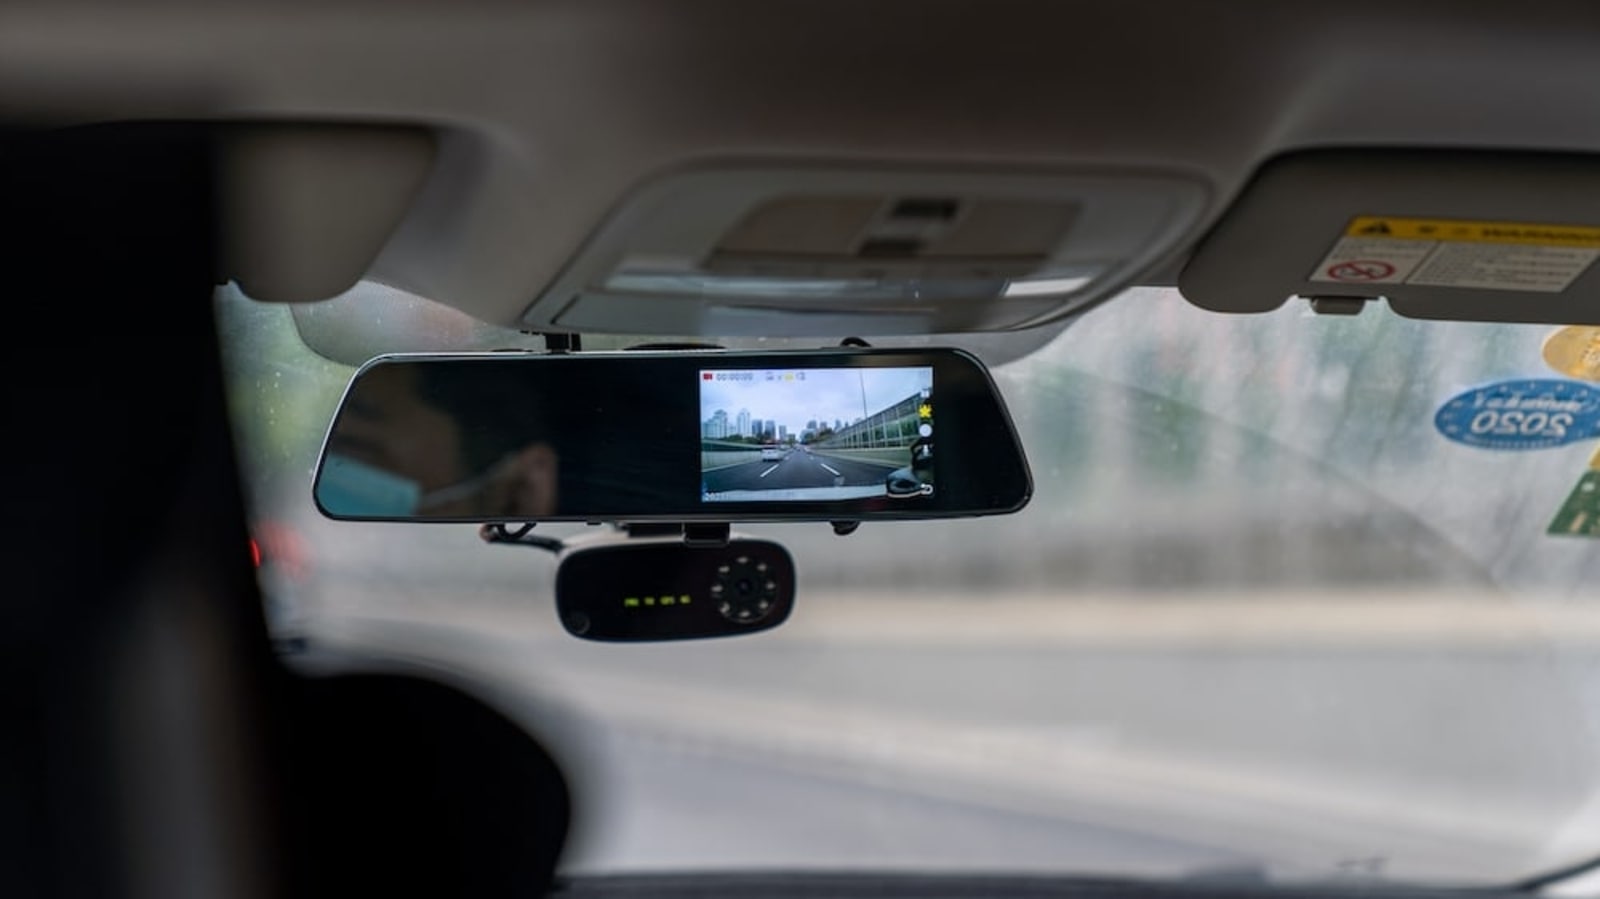 Car dash camera deals: Vantrue, Transcend to Qubo, check out these options  from top brands